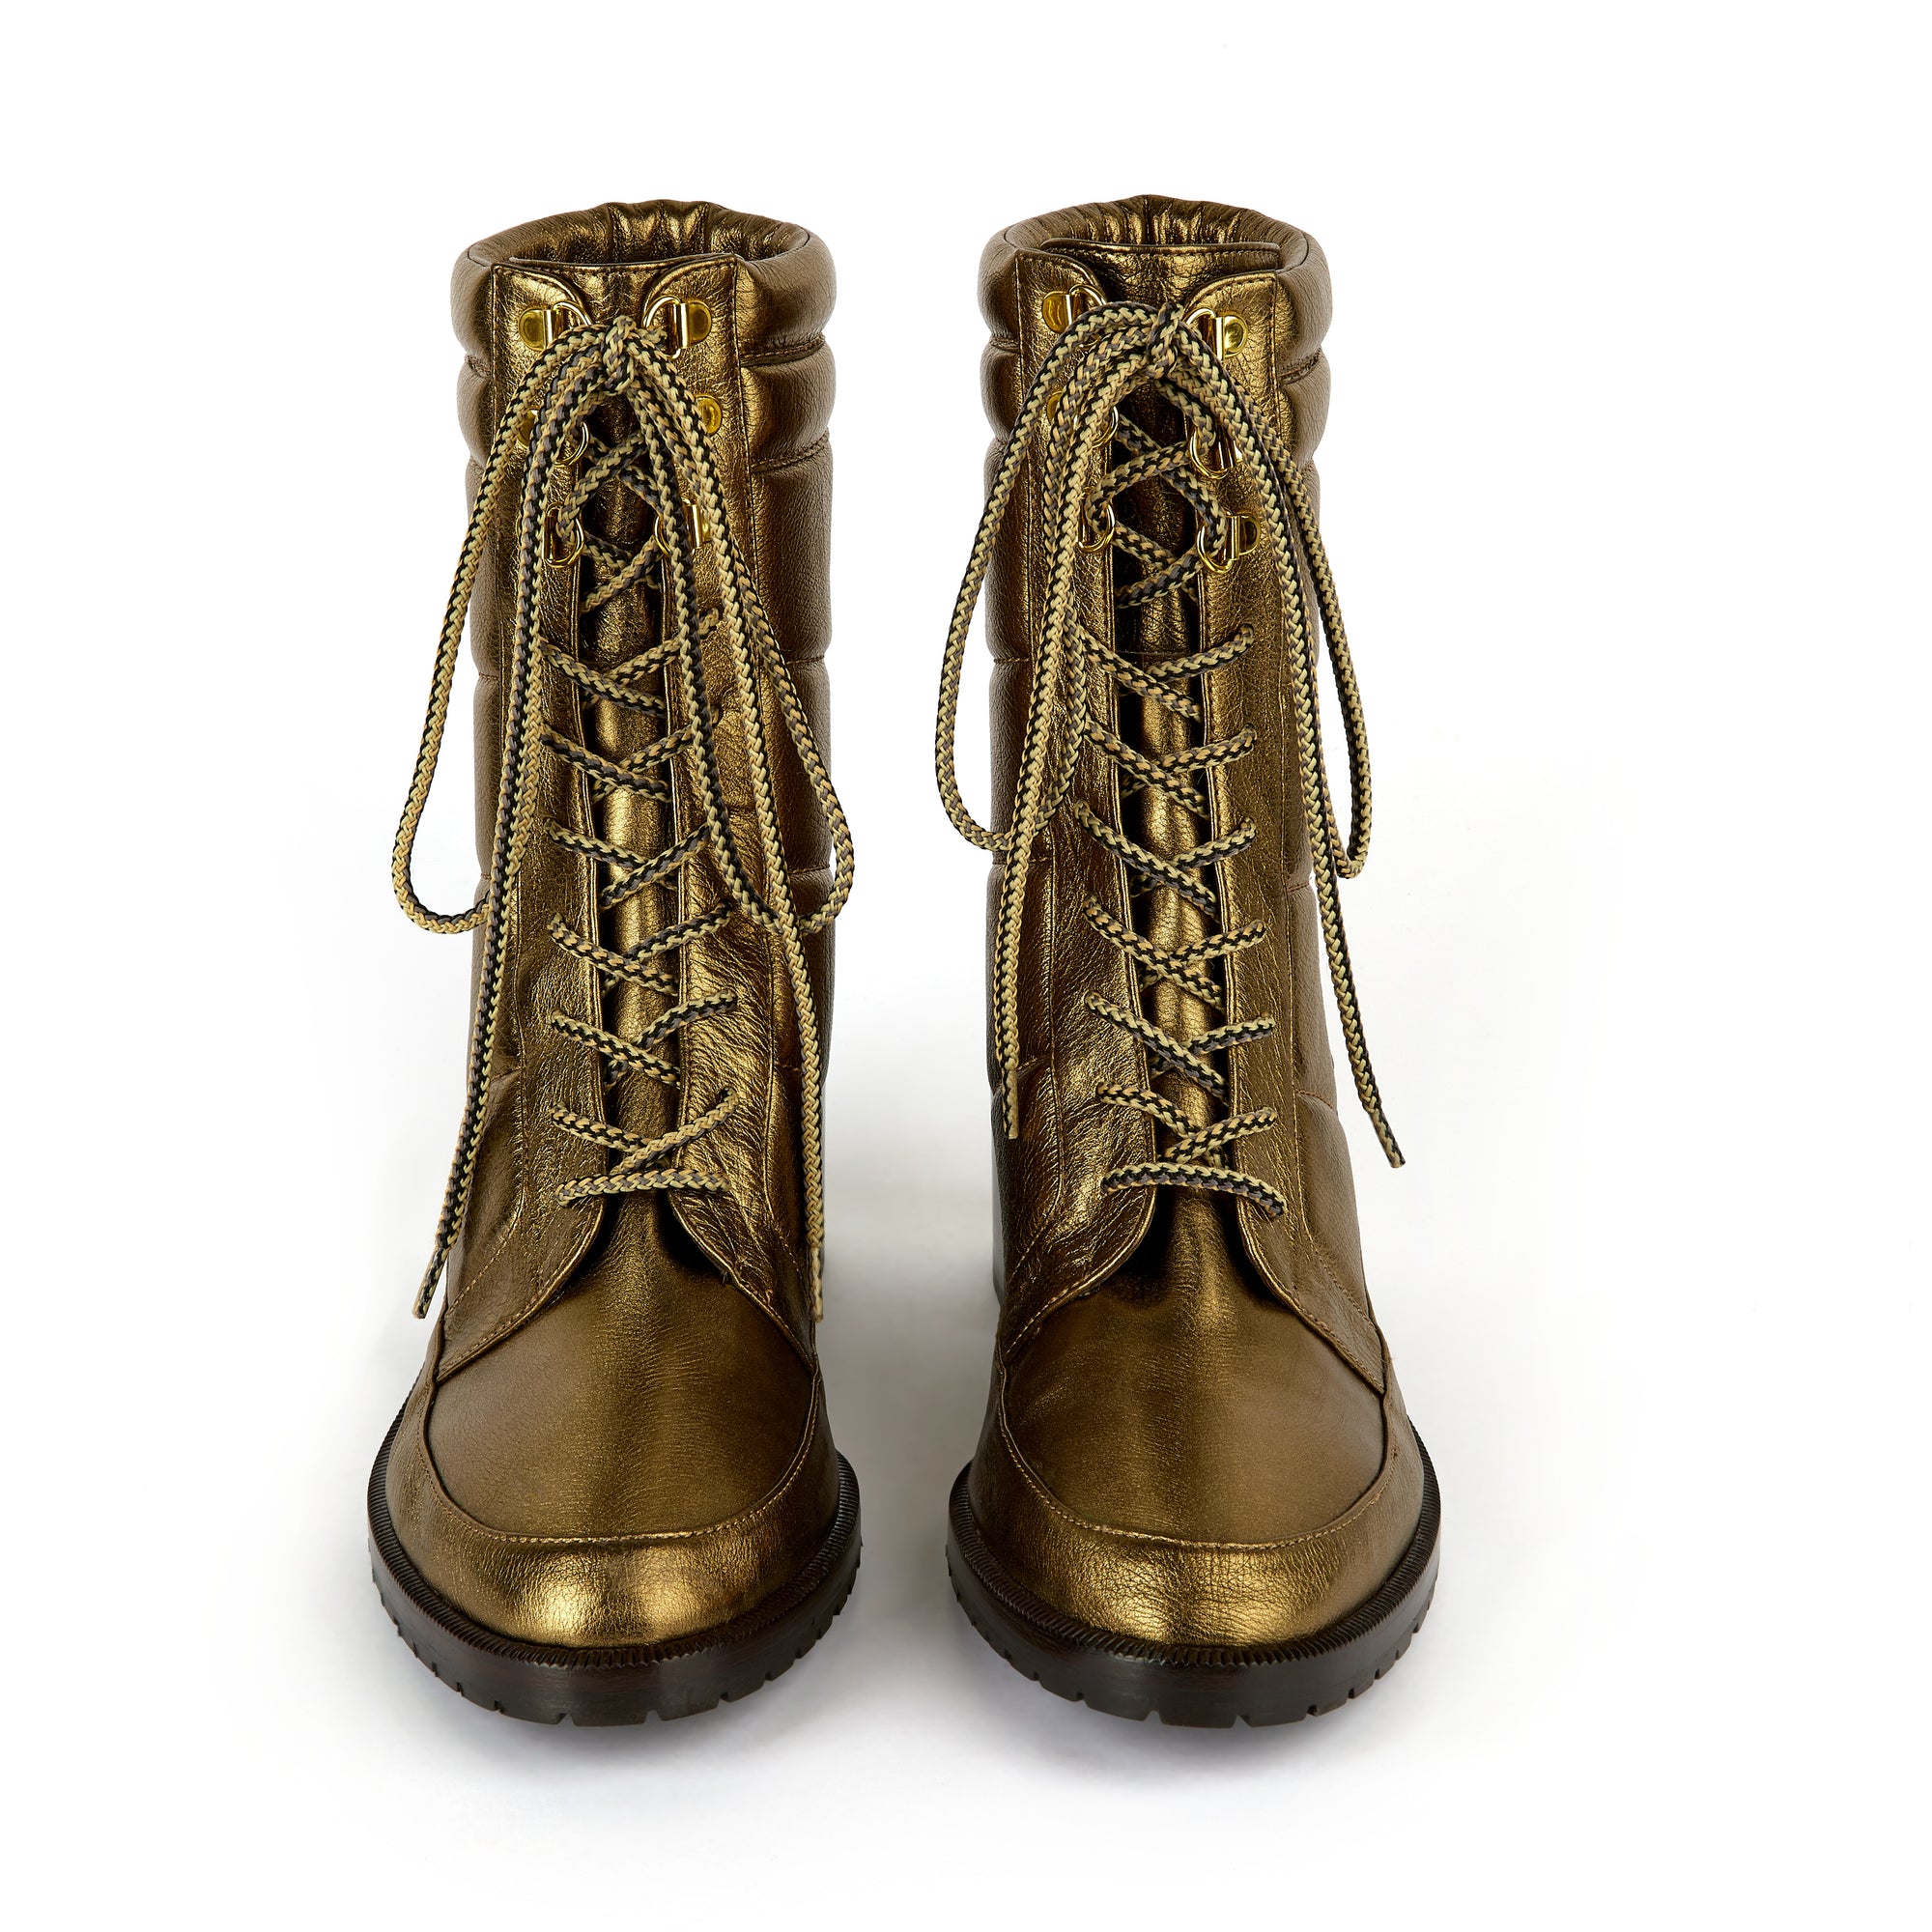 Rita boots with 50 leather laces - Dark Gold